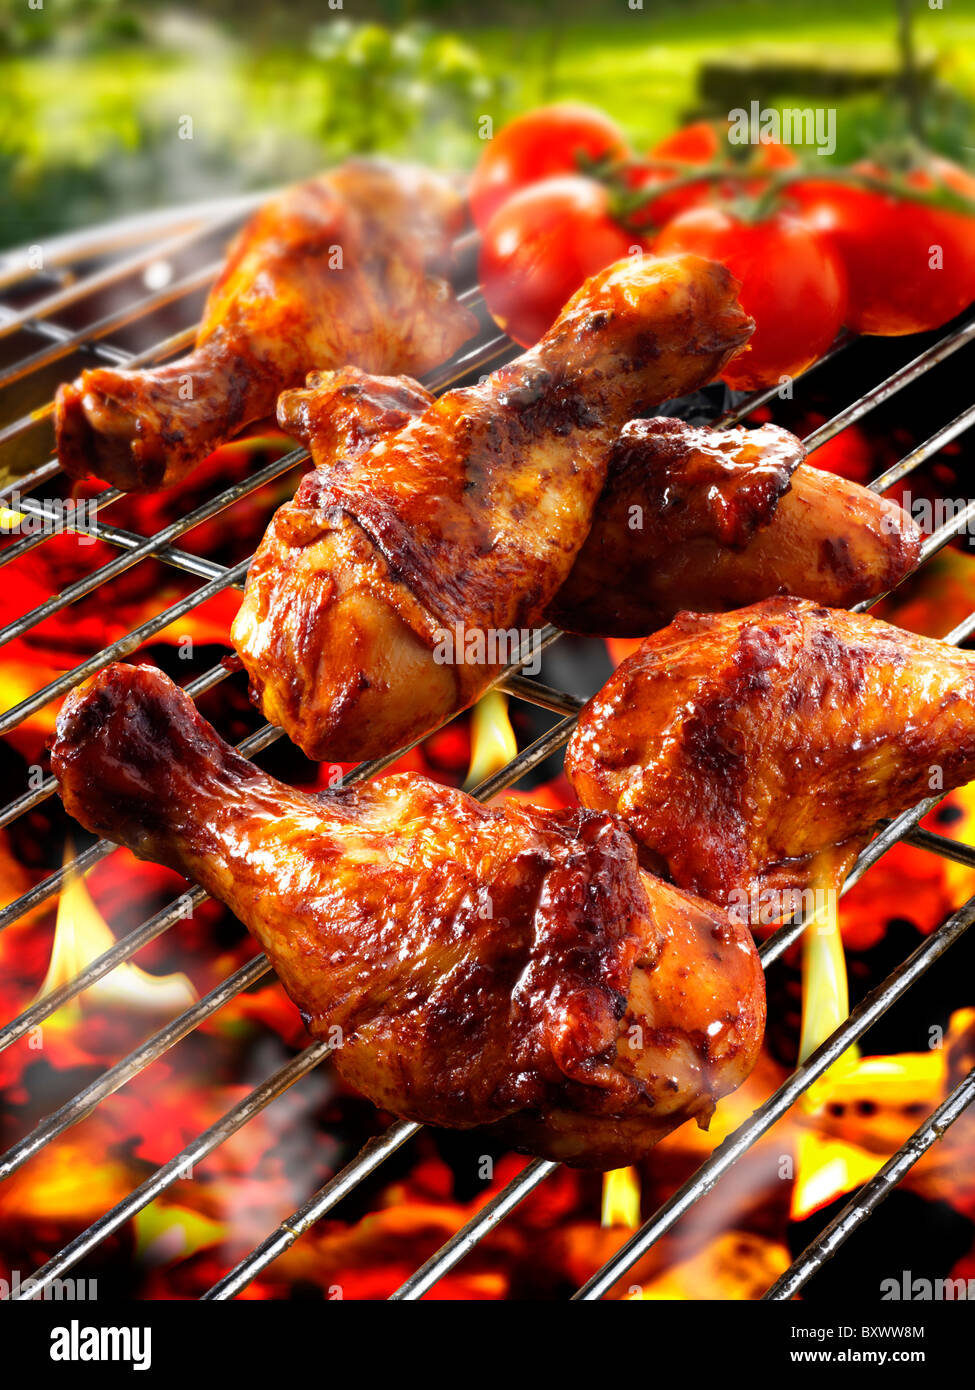 Barbecue chicken legs & thighs on a BBQ grill Stock Photo - Alamy